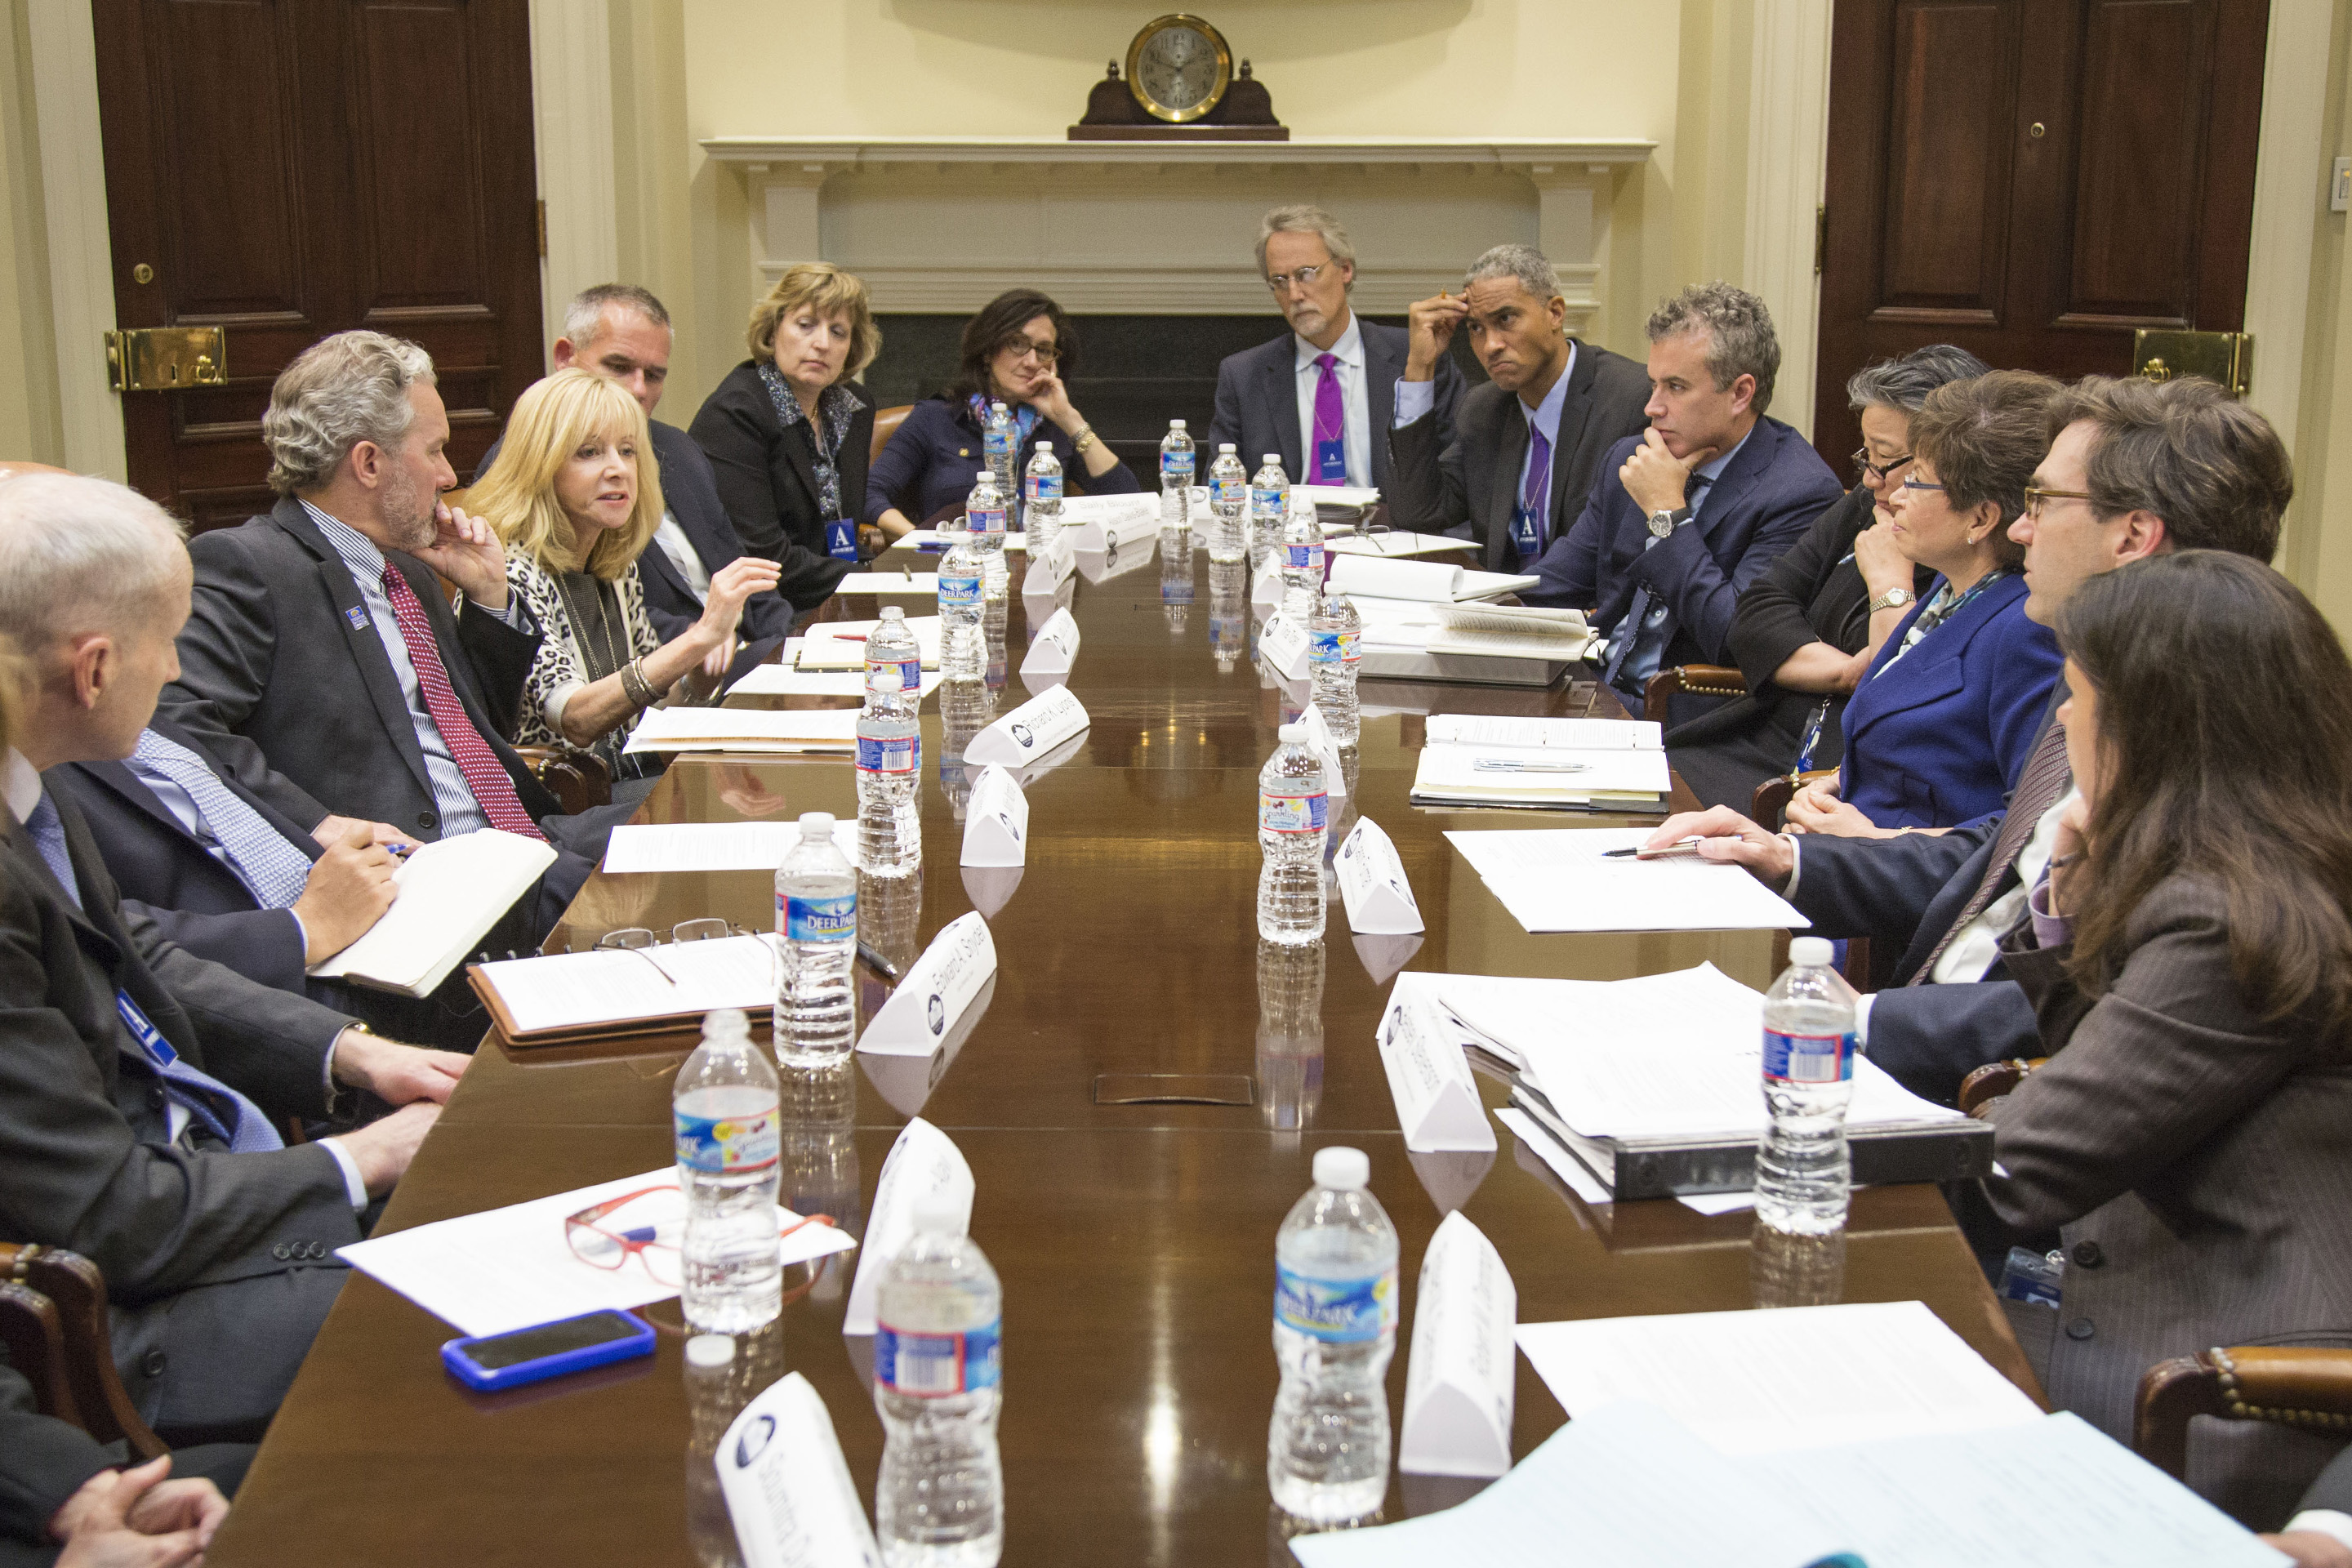 White House senior advisors meet with business school deans in the Roosevelt Room of the White House, April 16, 2014.